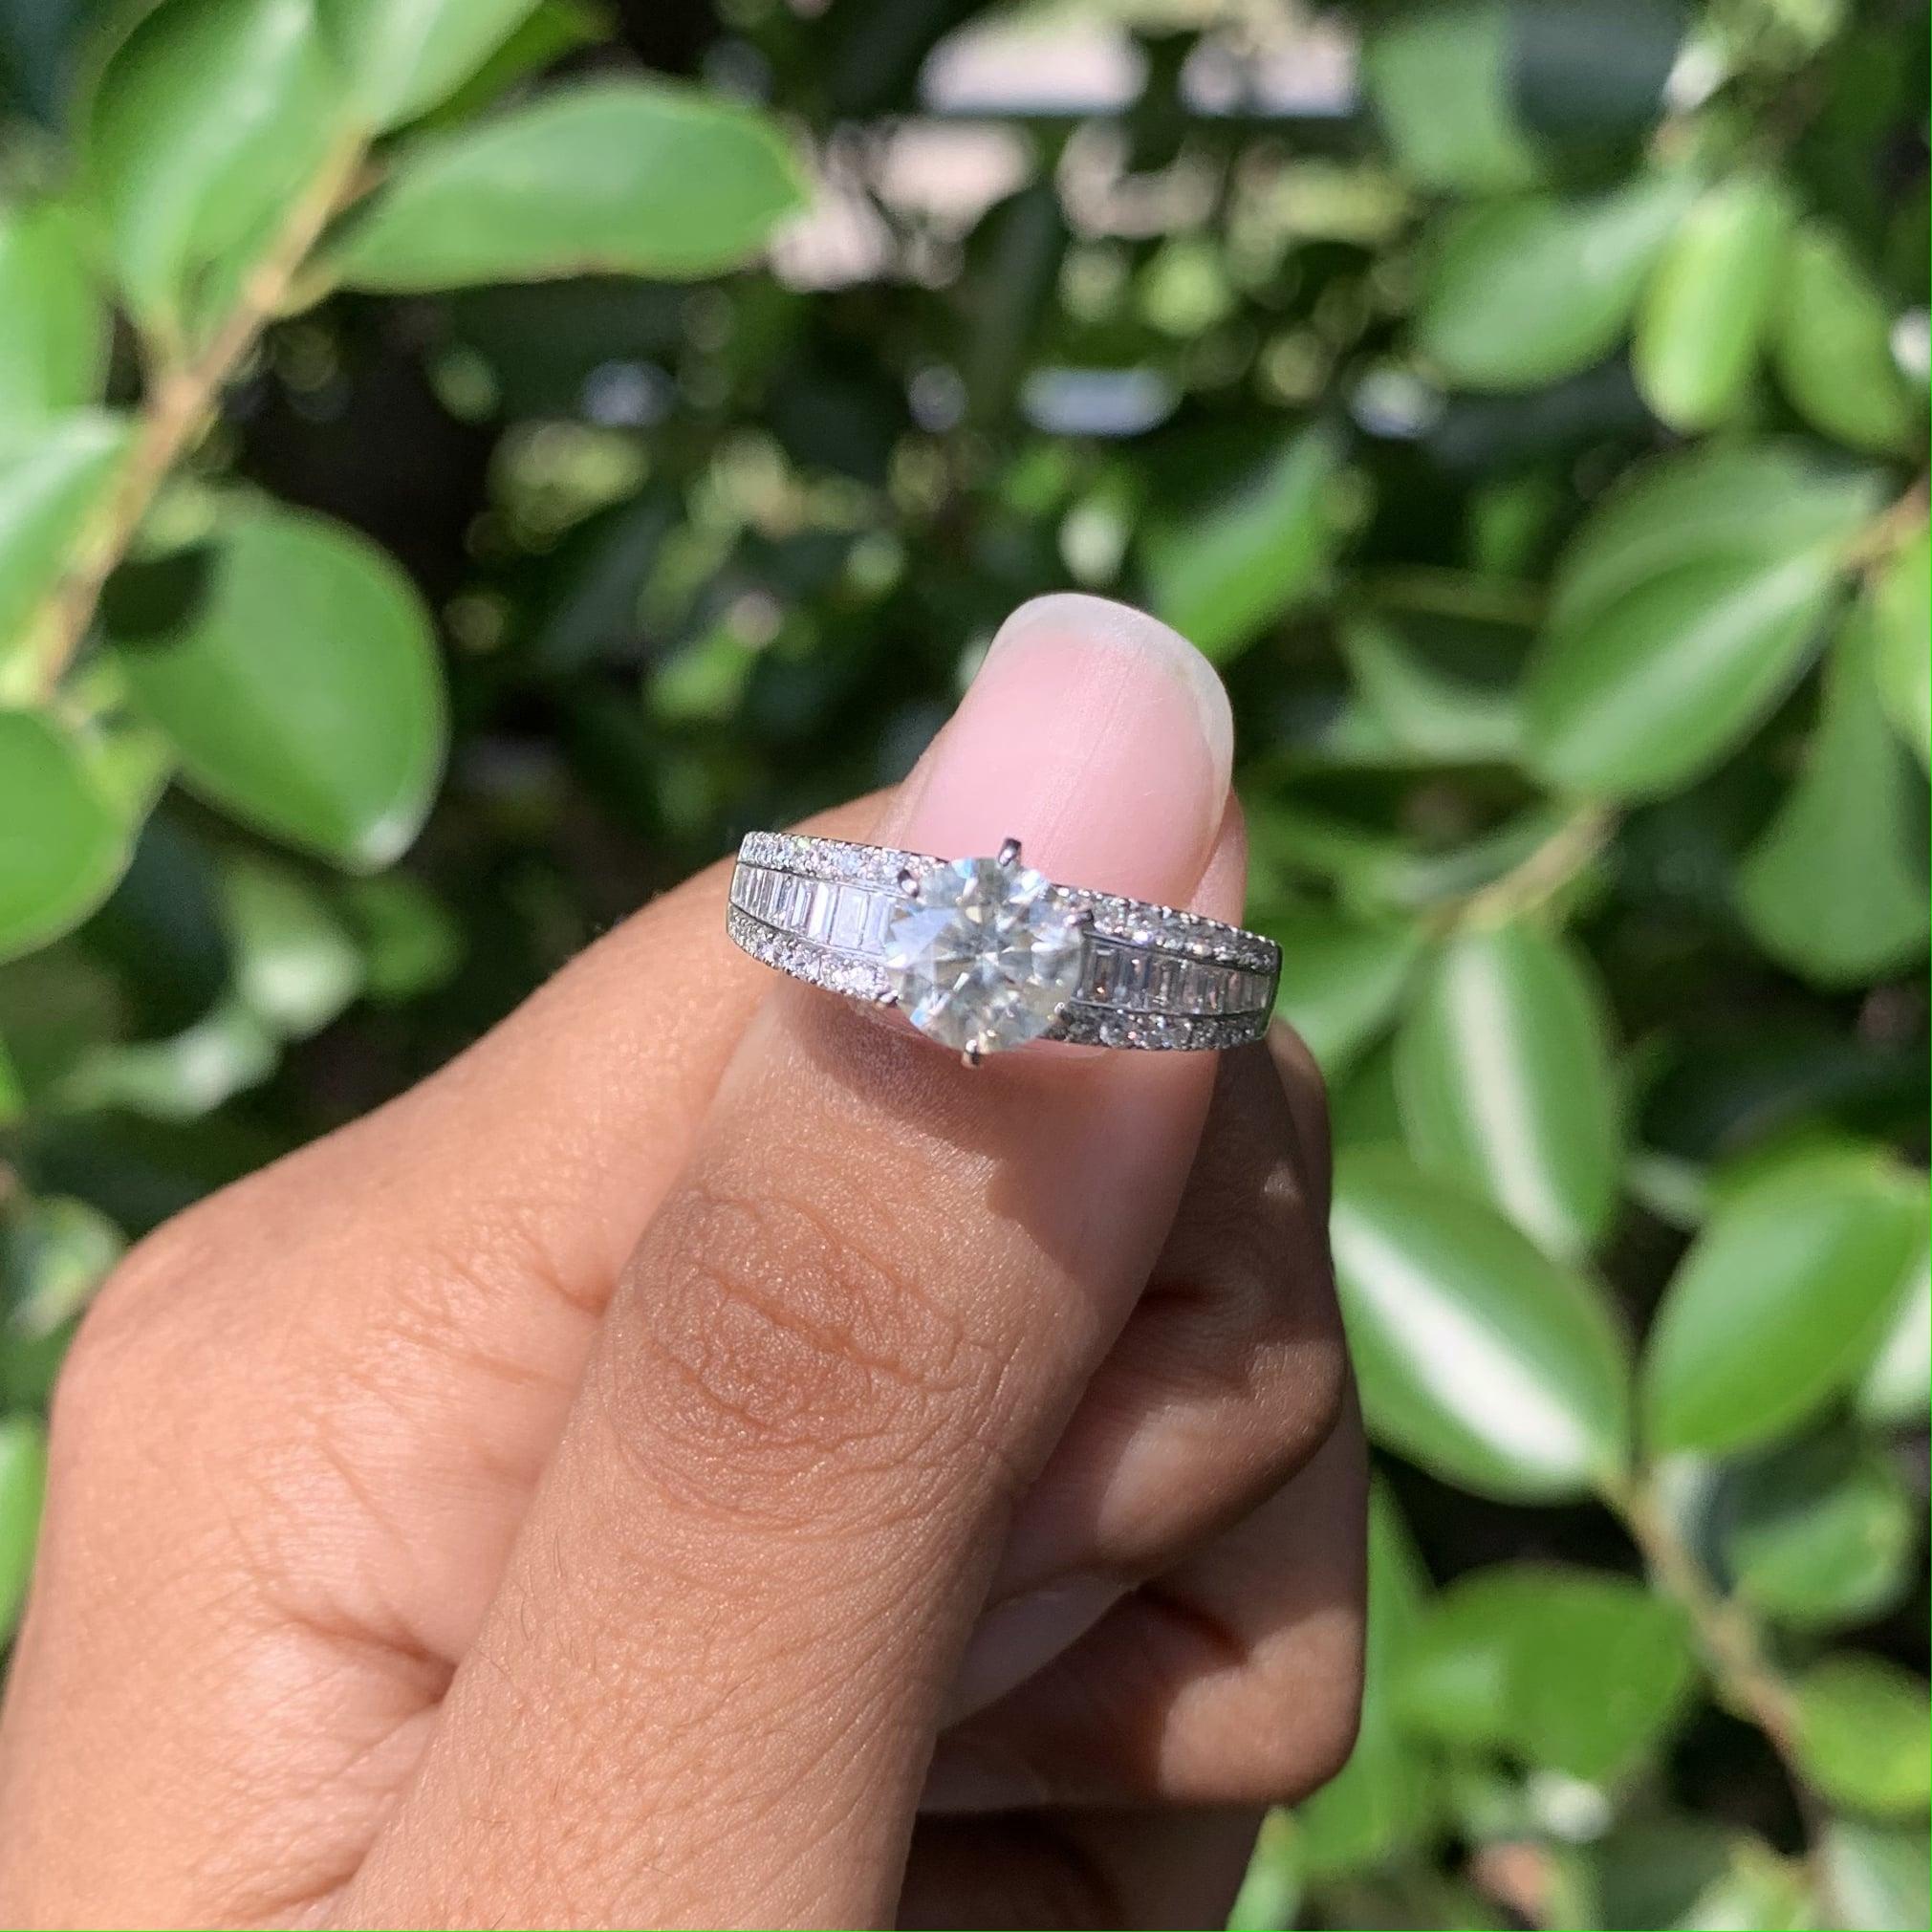 This exquisite 1.03 Carat Diamond Solitaire ring is the perfect find for you!

Whether you've been contemplating a proposal or simply seeking a luxurious diamond ring for yourself, this flawless and elegant piece is guaranteed to capture the heart